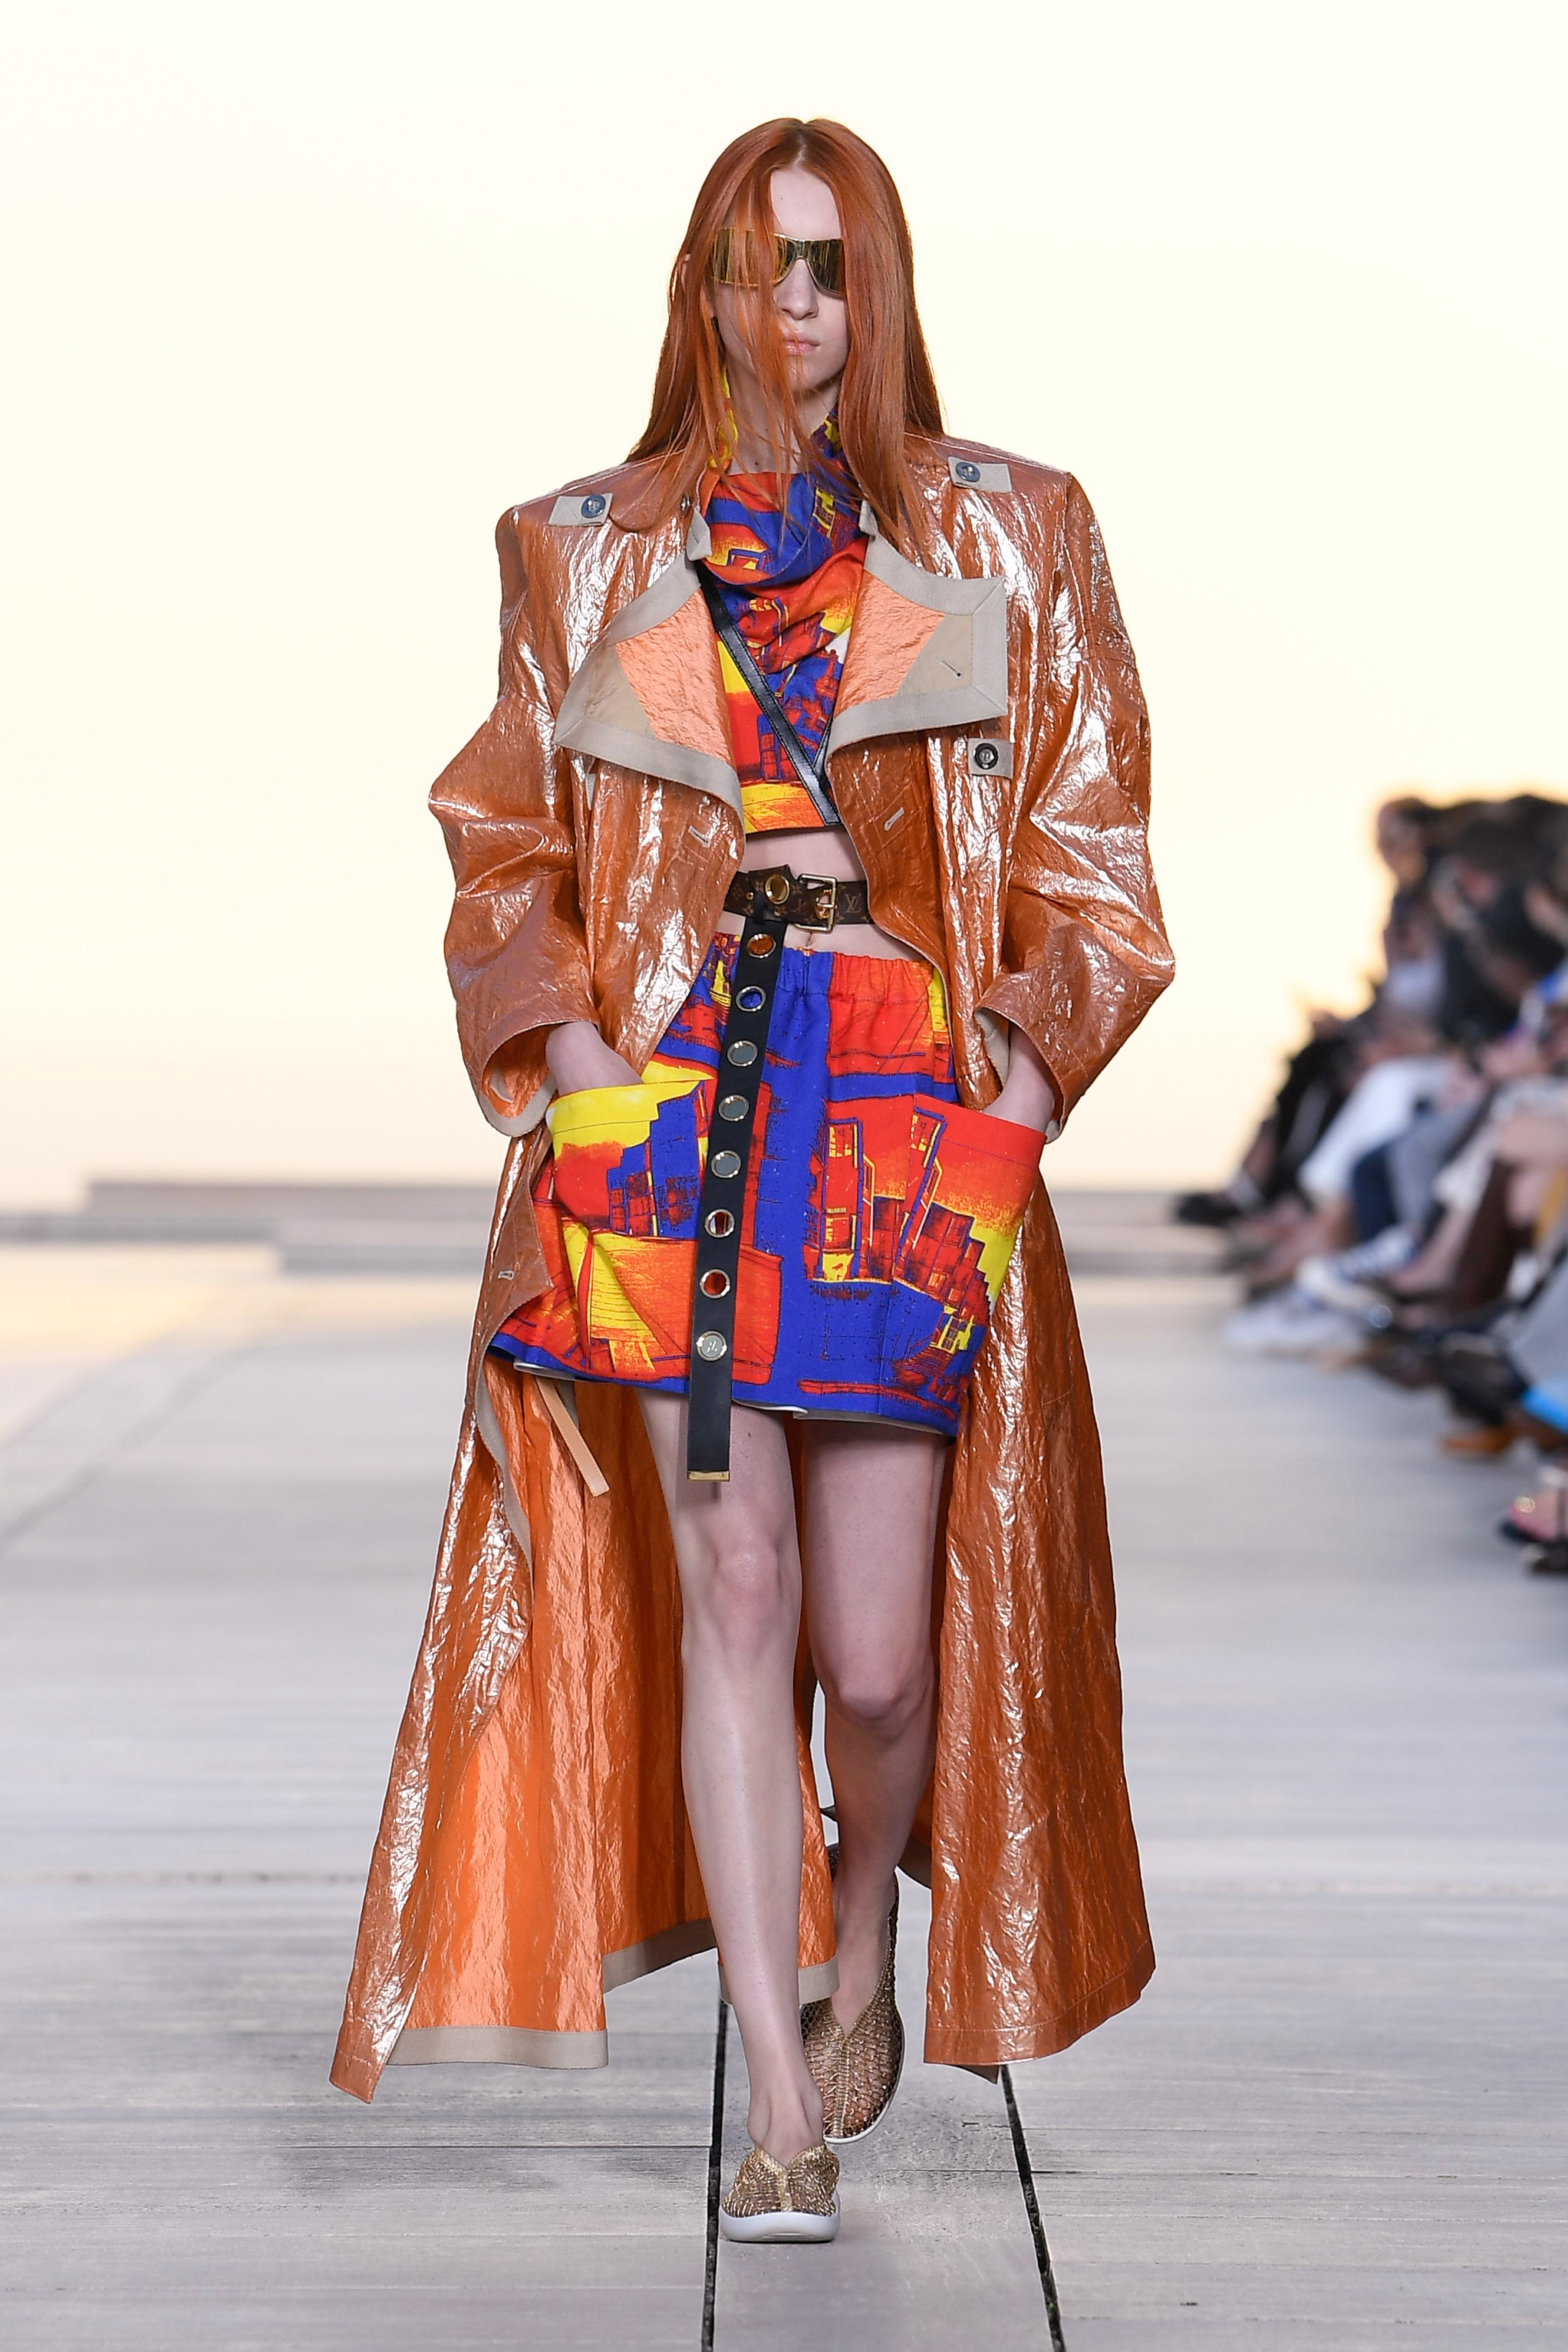 Louis Vuitton cruise collection show takes place in San Diego